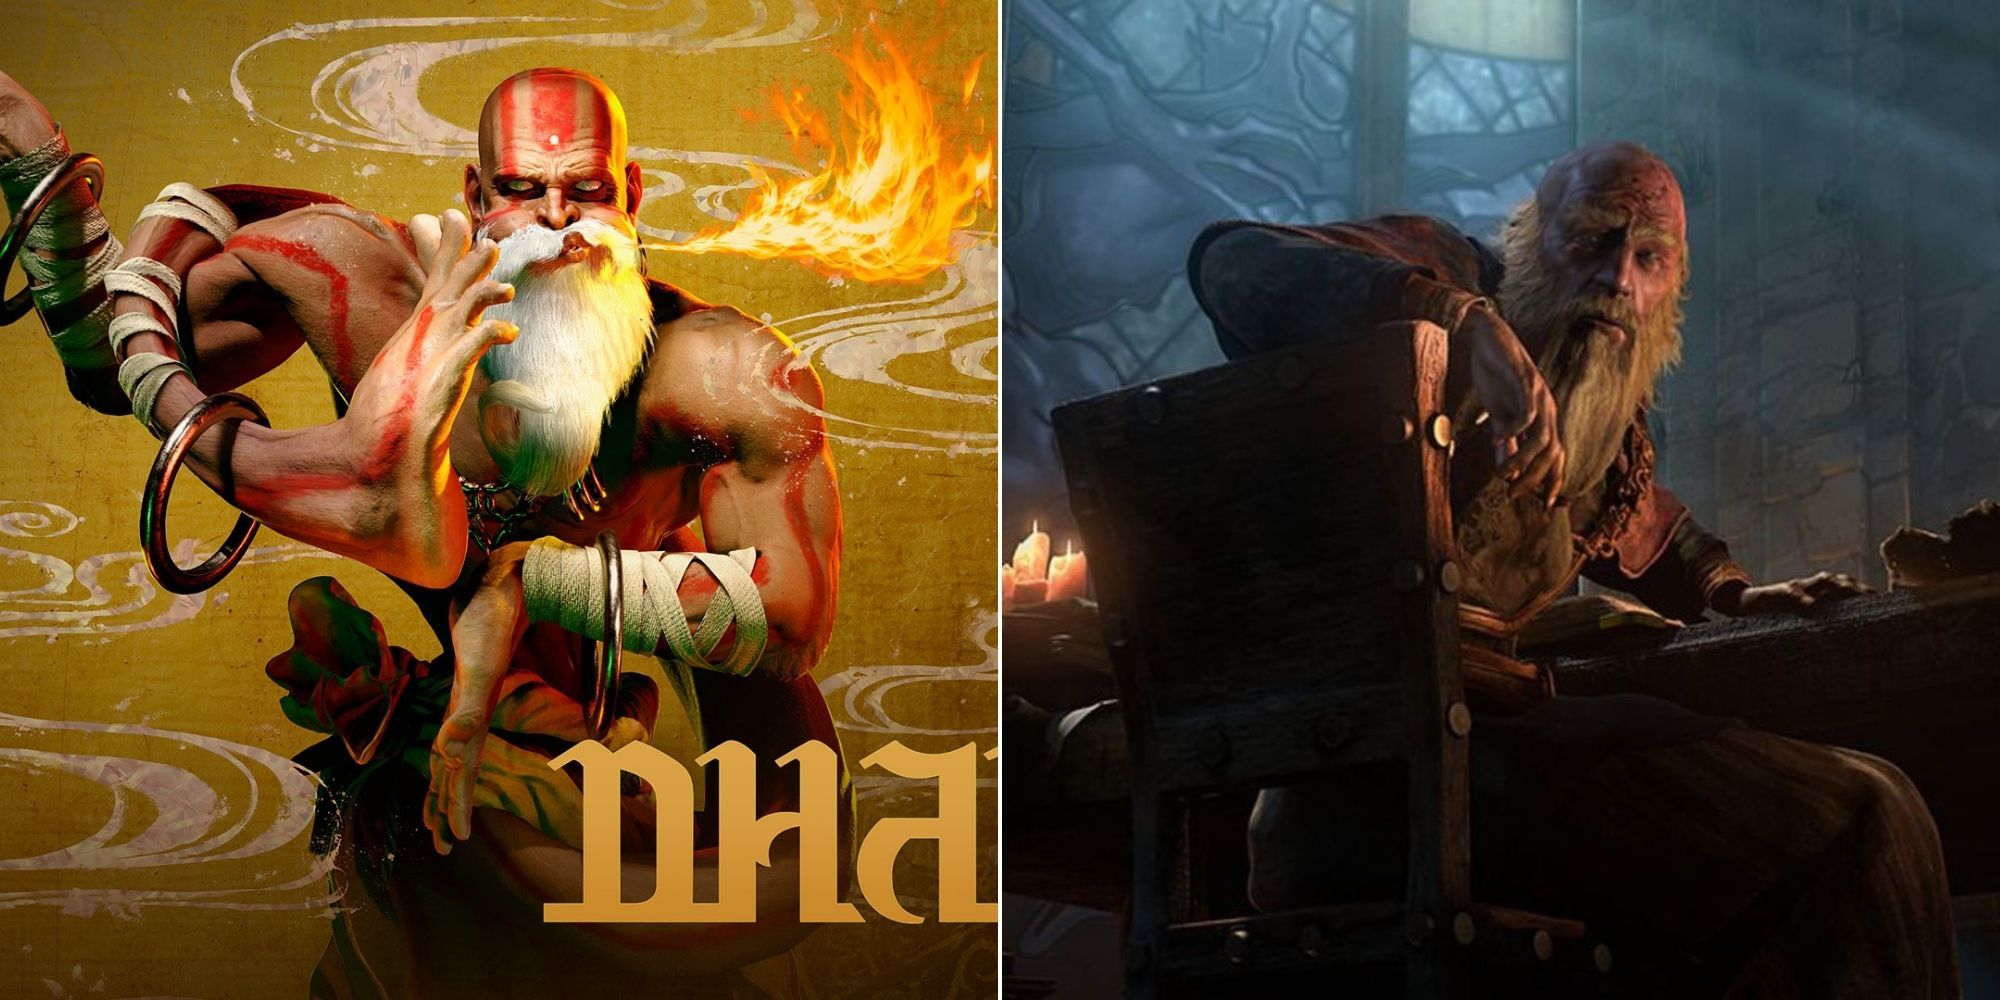 collage image of dhalsim from street fighter and deckard cain from the diablo series